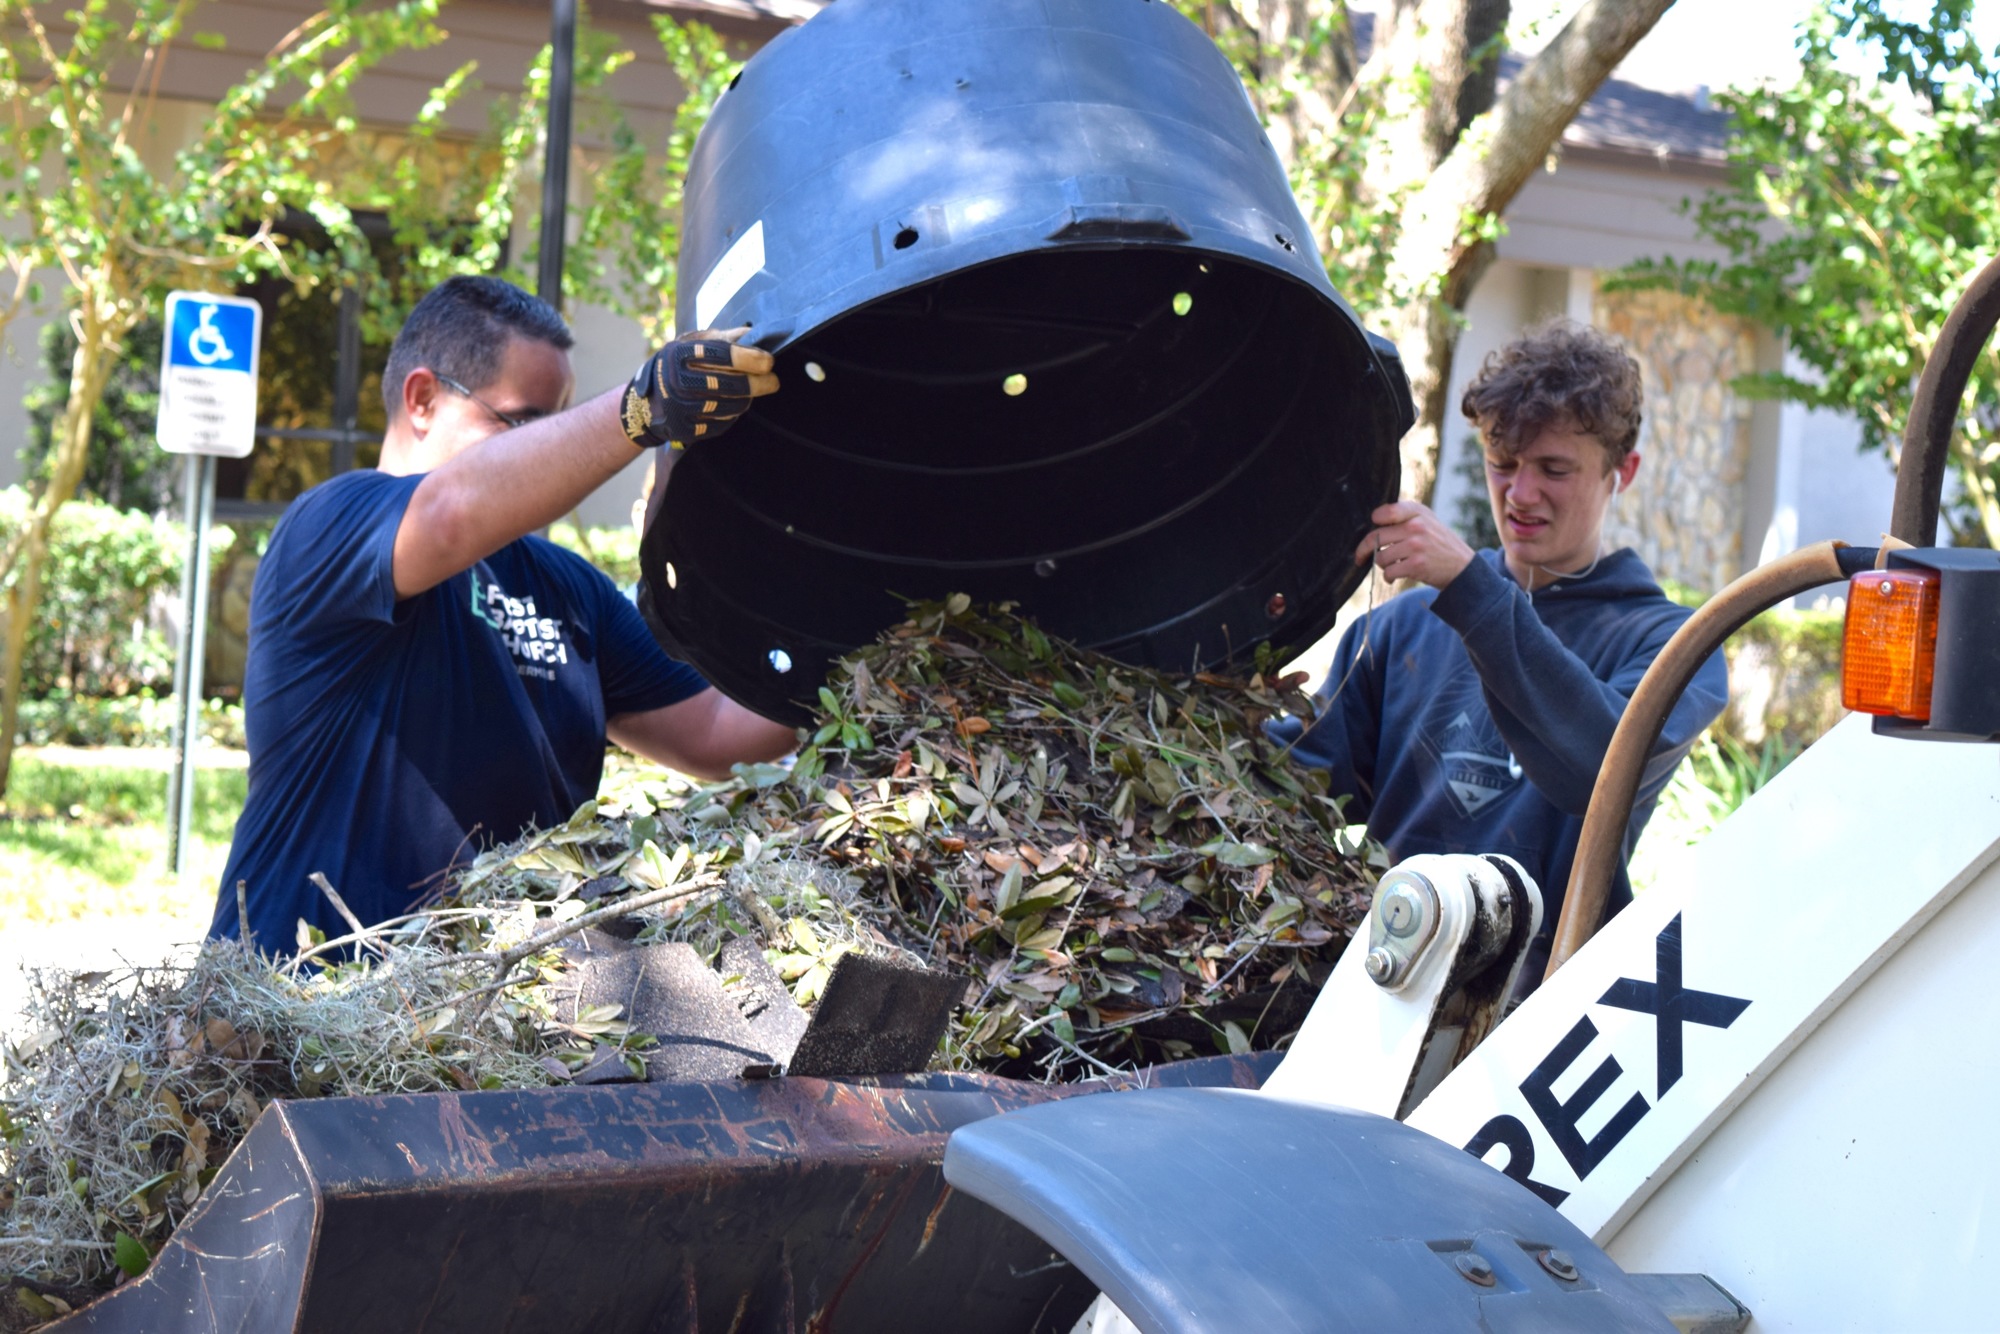 Volunteers Nelson Bonet and Zach Taggert worked together to dump a load of debris onto a machine.